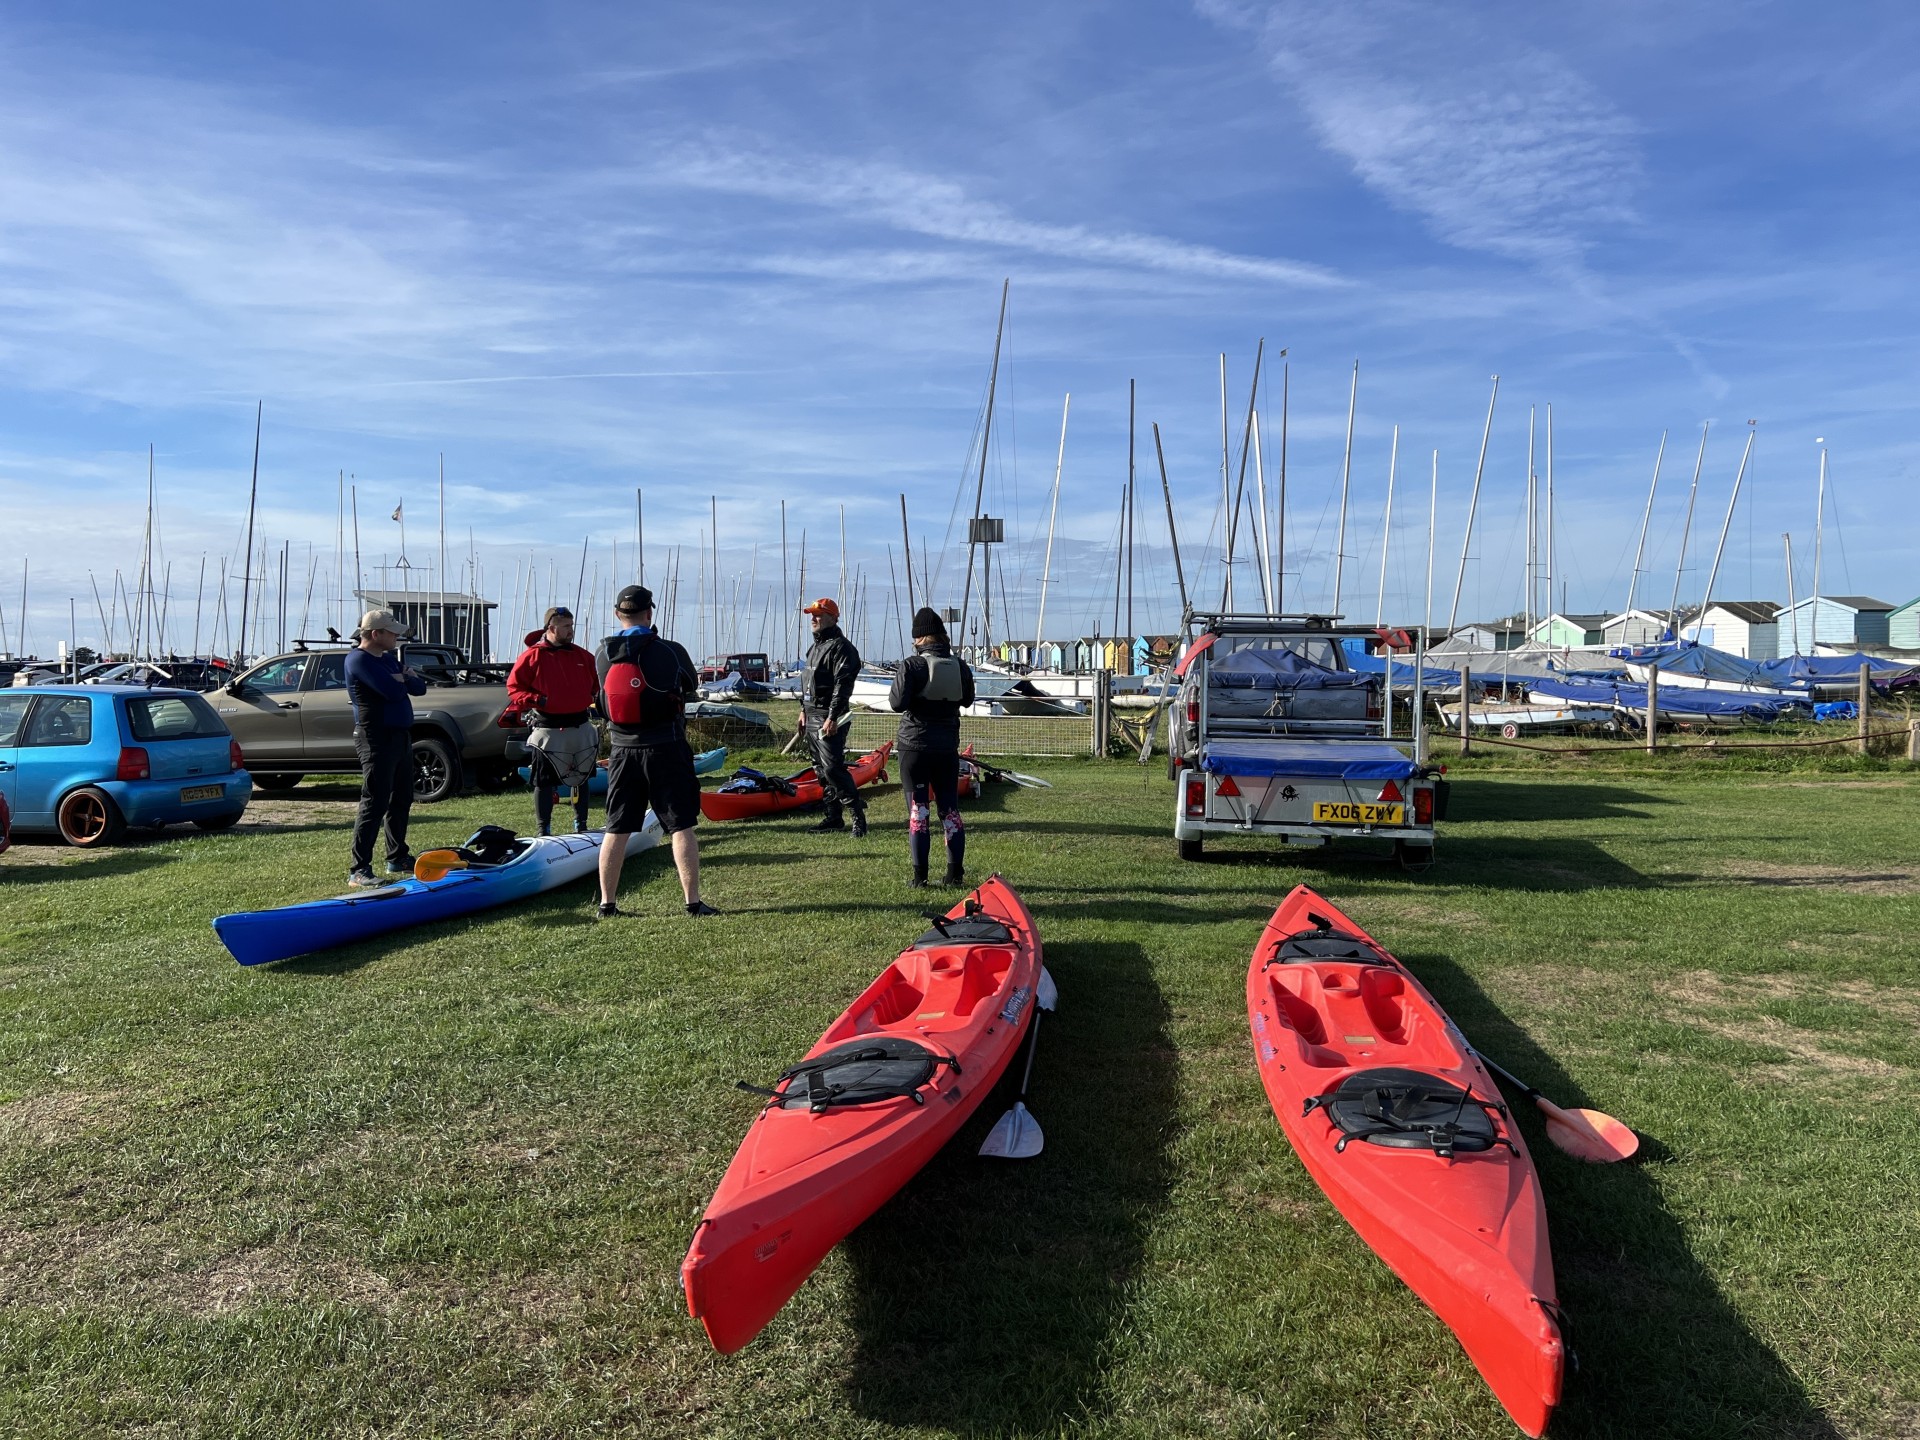 Kayaks on the grass ready for use with NOMAD Sea Kayaking.